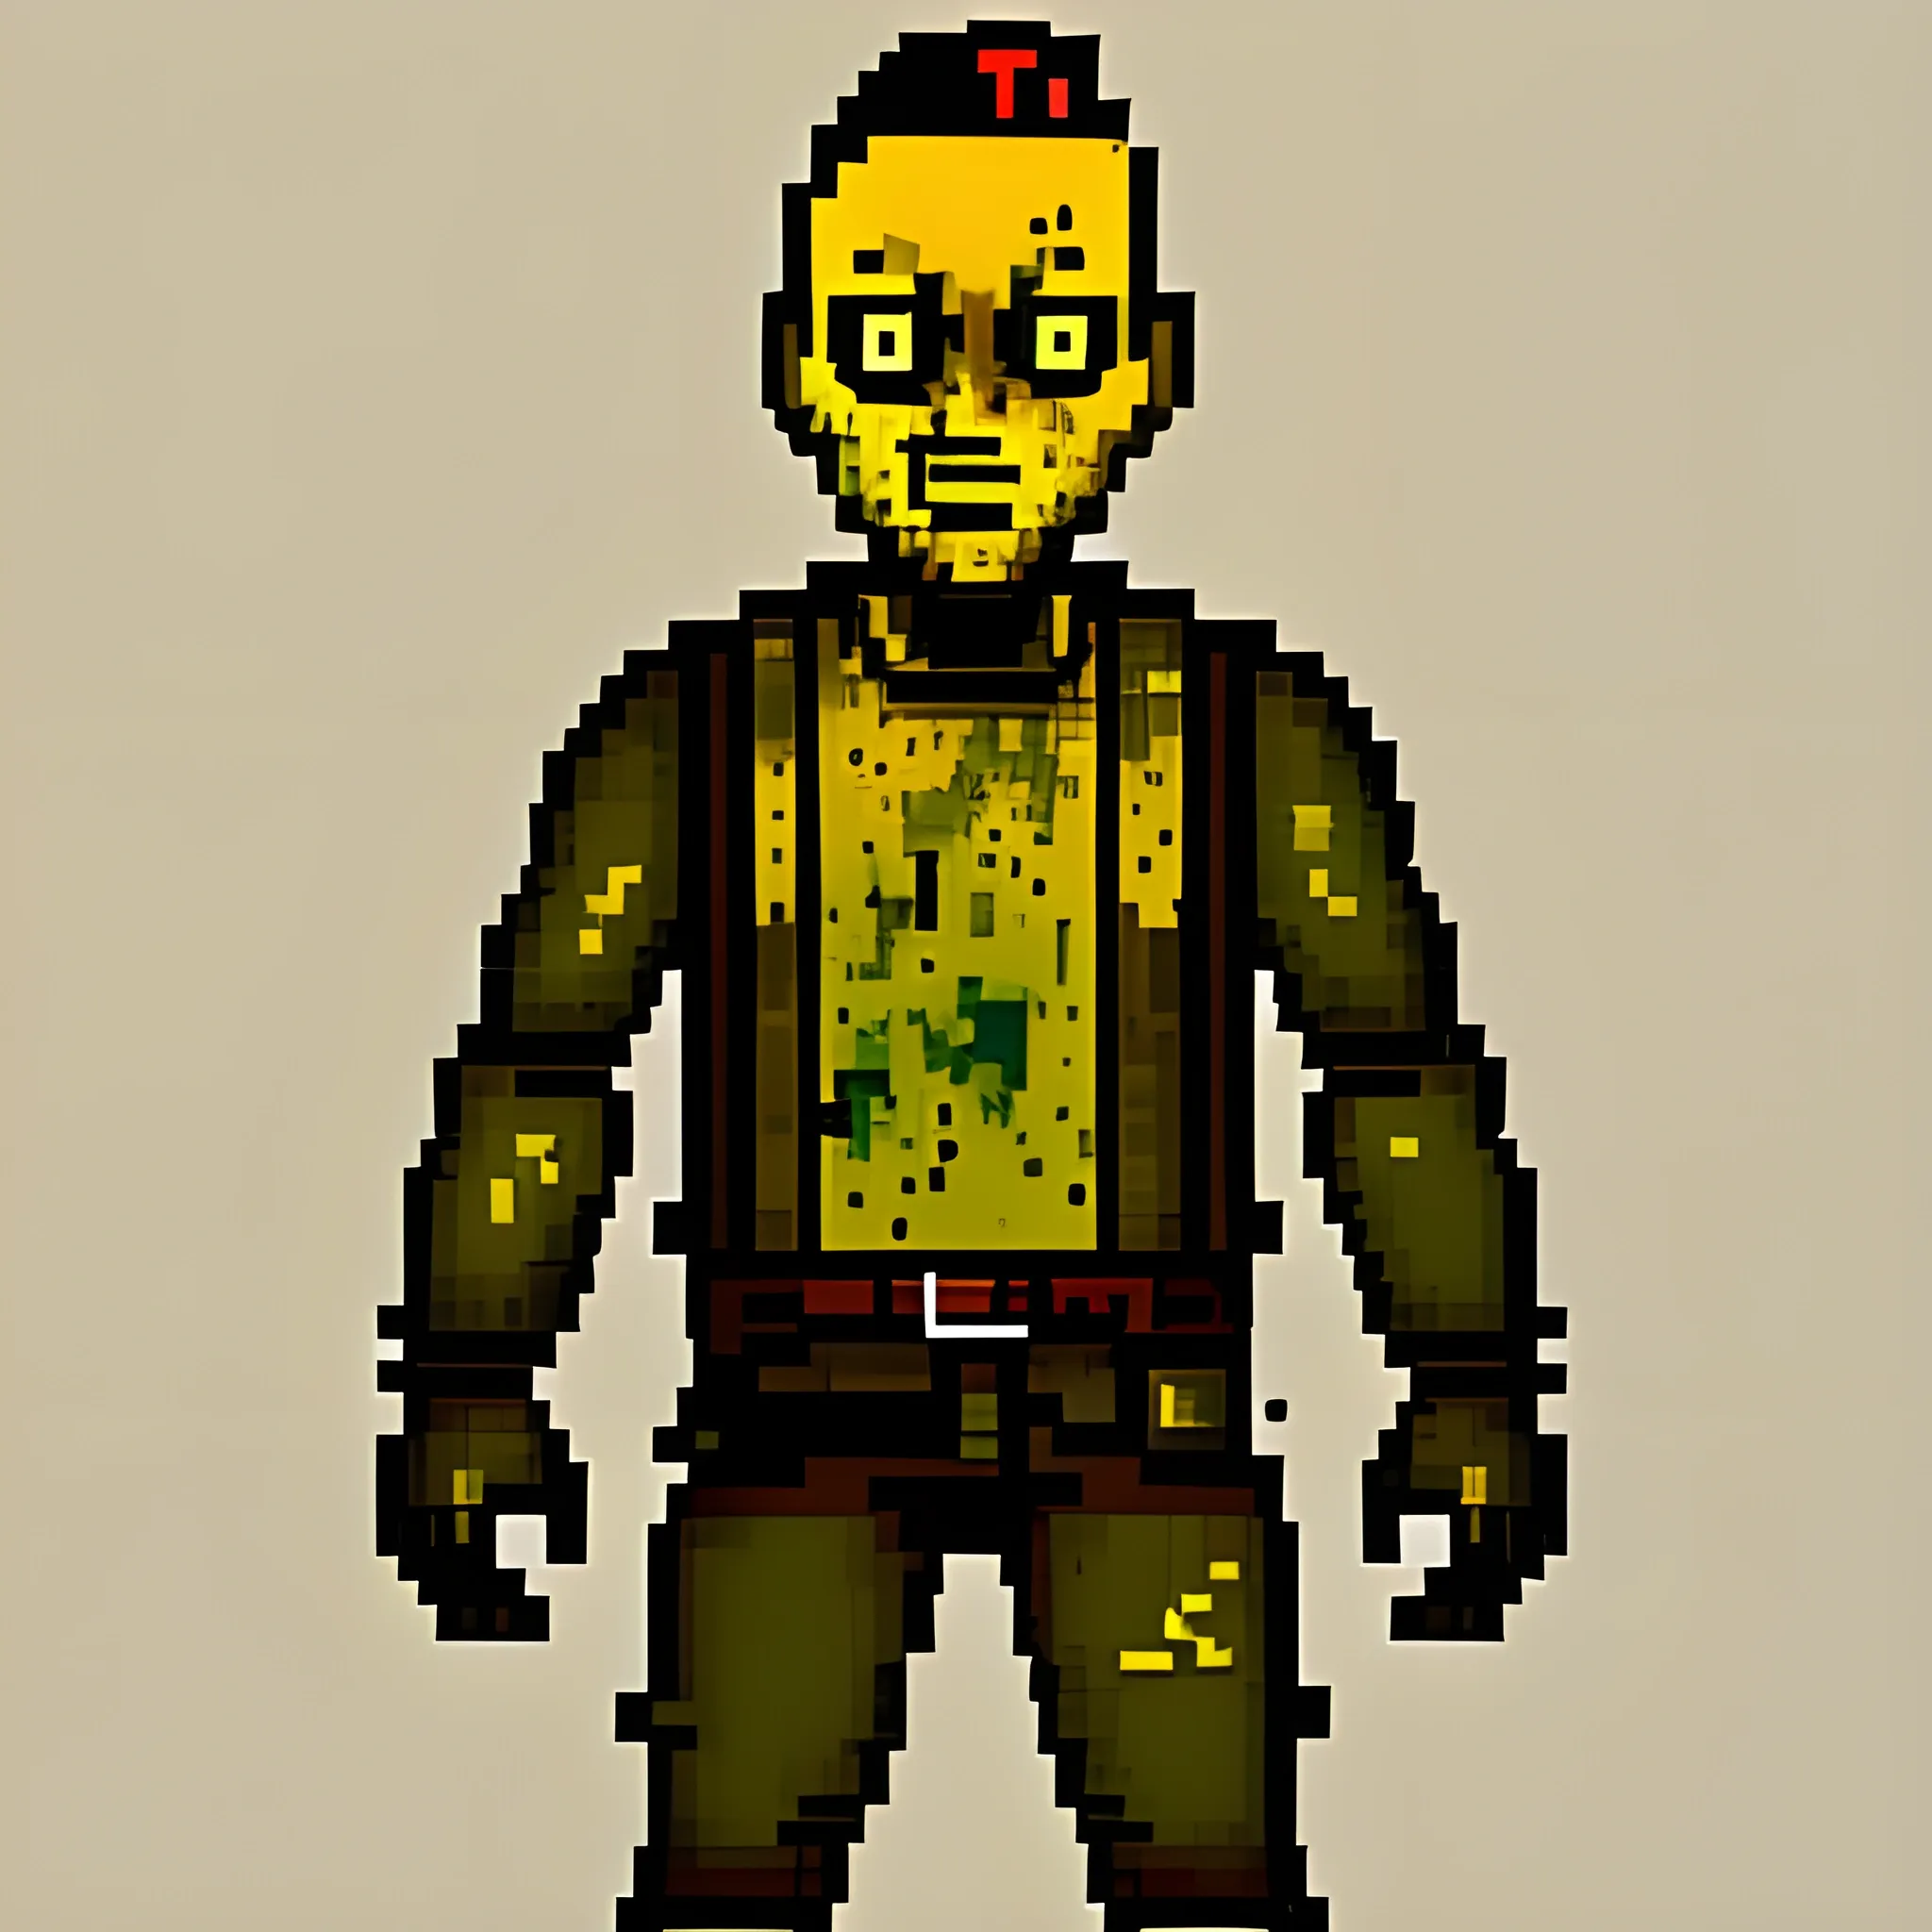 fallout 4 style, pixel art, full body feral zombie with yellow skin, no nose, and several glowing pustules

